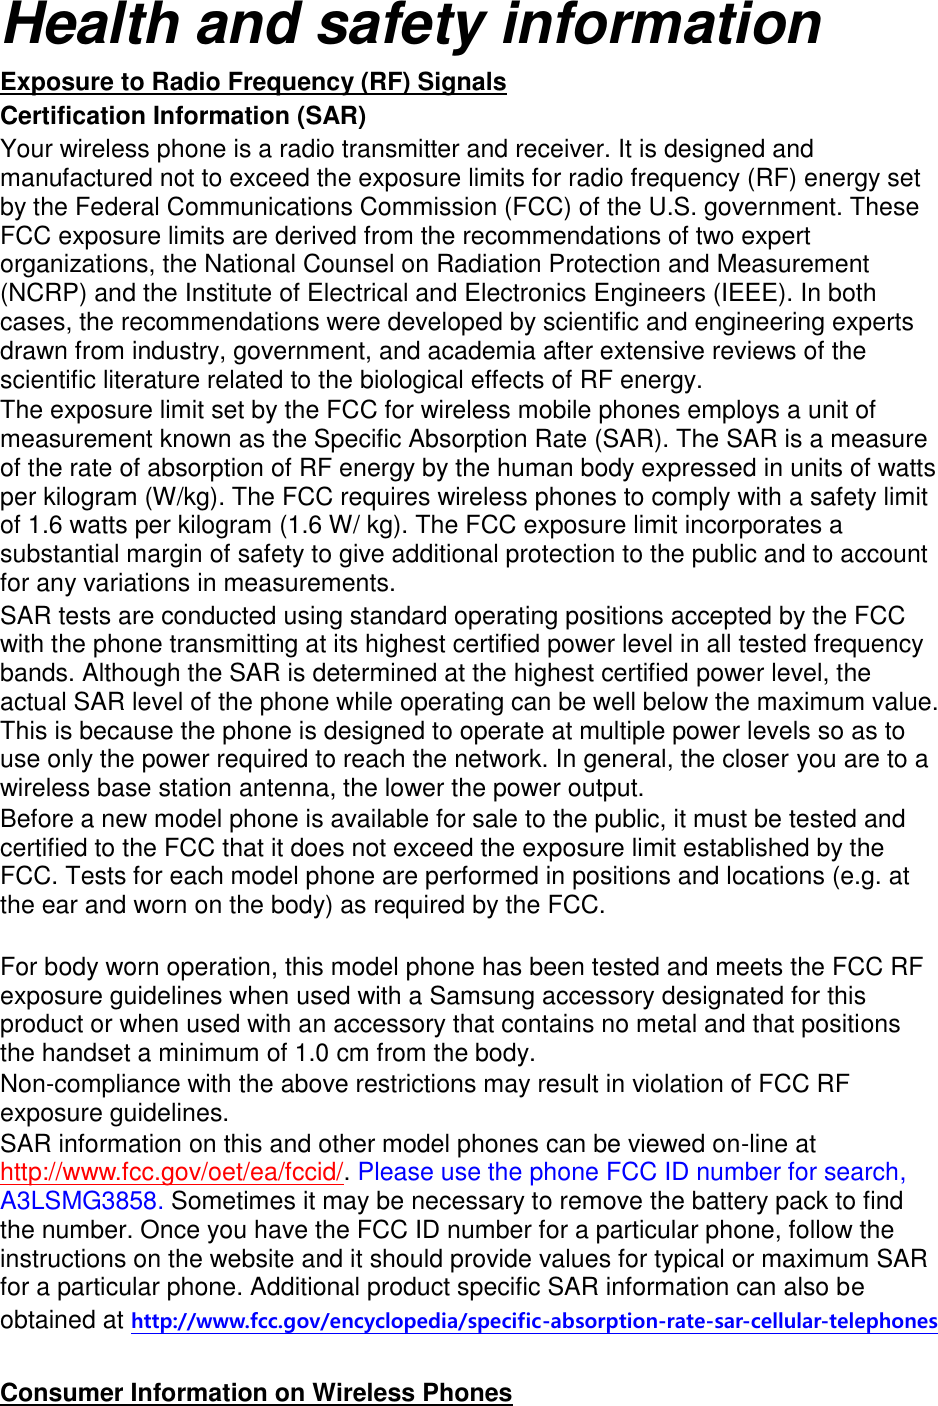 Health and safety information Exposure to Radio Frequency (RF) Signals Certification Information (SAR) Your wireless phone is a radio transmitter and receiver. It is designed and manufactured not to exceed the exposure limits for radio frequency (RF) energy set by the Federal Communications Commission (FCC) of the U.S. government. These FCC exposure limits are derived from the recommendations of two expert organizations, the National Counsel on Radiation Protection and Measurement (NCRP) and the Institute of Electrical and Electronics Engineers (IEEE). In both cases, the recommendations were developed by scientific and engineering experts drawn from industry, government, and academia after extensive reviews of the scientific literature related to the biological effects of RF energy. The exposure limit set by the FCC for wireless mobile phones employs a unit of measurement known as the Specific Absorption Rate (SAR). The SAR is a measure of the rate of absorption of RF energy by the human body expressed in units of watts per kilogram (W/kg). The FCC requires wireless phones to comply with a safety limit of 1.6 watts per kilogram (1.6 W/ kg). The FCC exposure limit incorporates a substantial margin of safety to give additional protection to the public and to account for any variations in measurements. SAR tests are conducted using standard operating positions accepted by the FCC with the phone transmitting at its highest certified power level in all tested frequency bands. Although the SAR is determined at the highest certified power level, the actual SAR level of the phone while operating can be well below the maximum value. This is because the phone is designed to operate at multiple power levels so as to use only the power required to reach the network. In general, the closer you are to a wireless base station antenna, the lower the power output. Before a new model phone is available for sale to the public, it must be tested and certified to the FCC that it does not exceed the exposure limit established by the FCC. Tests for each model phone are performed in positions and locations (e.g. at the ear and worn on the body) as required by the FCC.      For body worn operation, this model phone has been tested and meets the FCC RF exposure guidelines when used with a Samsung accessory designated for this product or when used with an accessory that contains no metal and that positions the handset a minimum of 1.0 cm from the body.   Non-compliance with the above restrictions may result in violation of FCC RF exposure guidelines. SAR information on this and other model phones can be viewed on-line at http://www.fcc.gov/oet/ea/fccid/. Please use the phone FCC ID number for search, A3LSMG3858. Sometimes it may be necessary to remove the battery pack to find the number. Once you have the FCC ID number for a particular phone, follow the instructions on the website and it should provide values for typical or maximum SAR for a particular phone. Additional product specific SAR information can also be obtained at http://www.fcc.gov/encyclopedia/specific-absorption-rate-sar-cellular-telephones  Consumer Information on Wireless Phones 